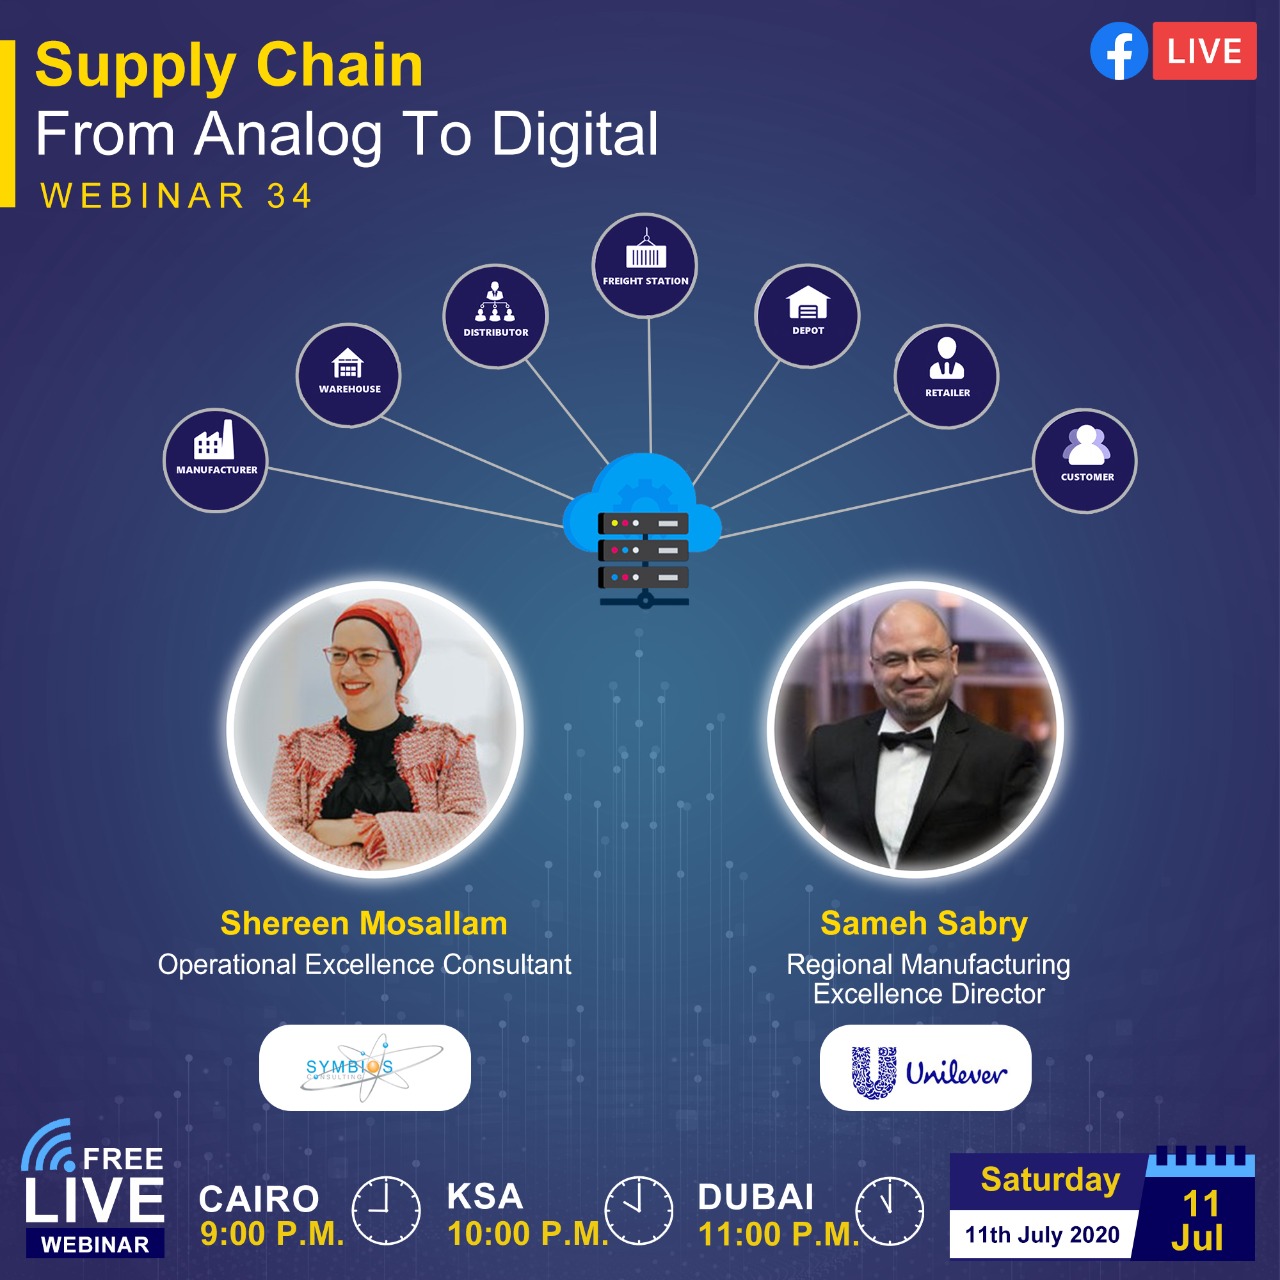 Supply Chain from Analog to Digital